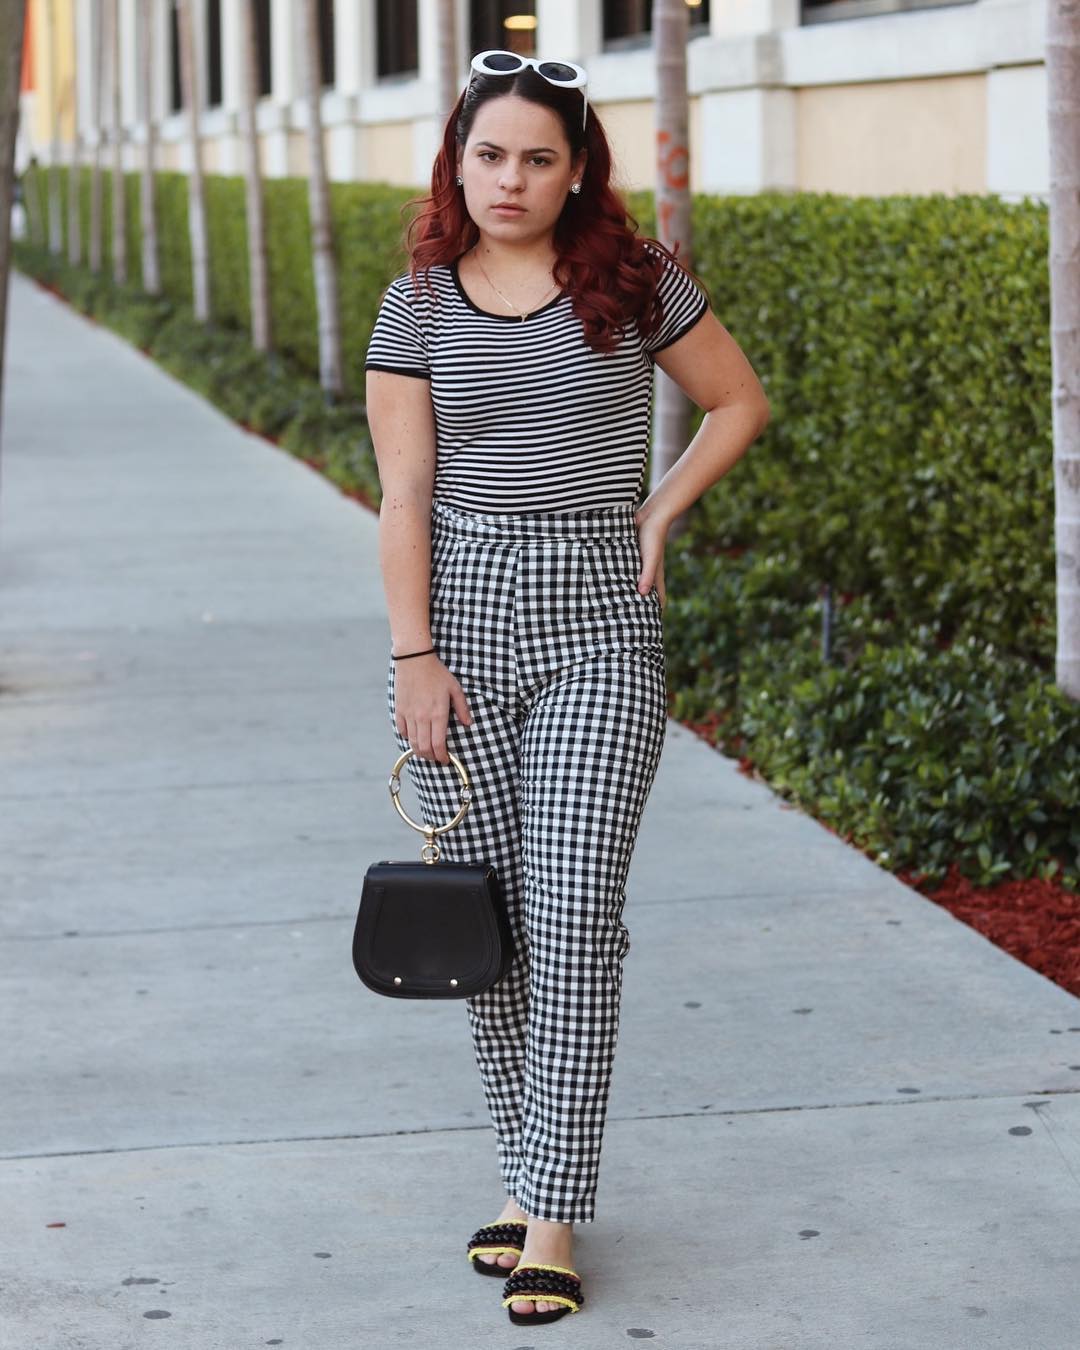 Black & White Stripes Top With Gingham Print Crop Pant And Handbag